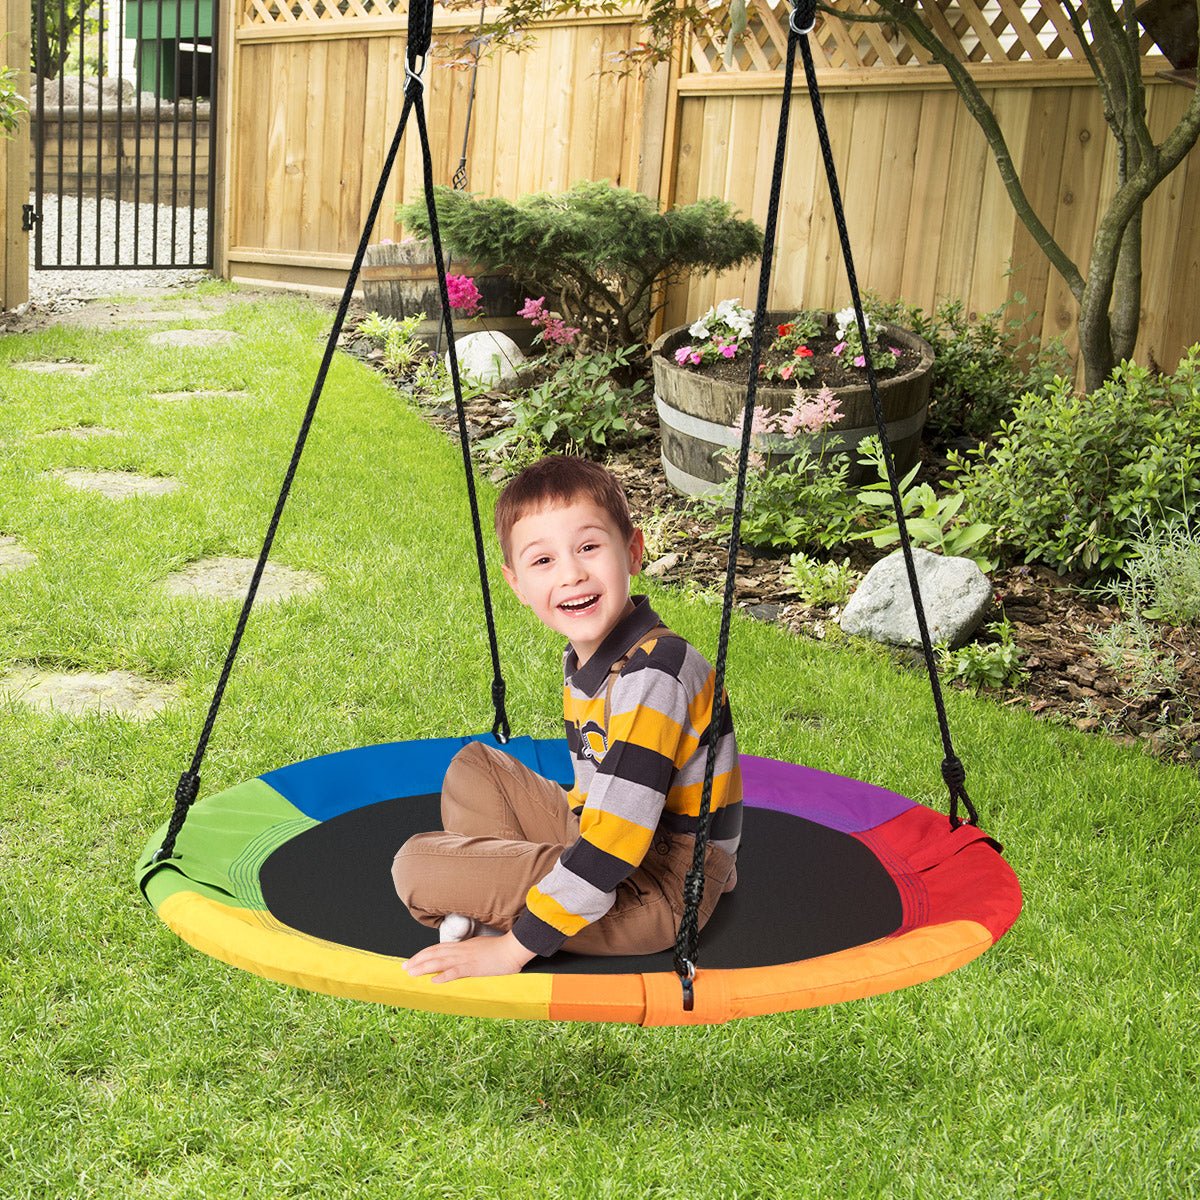 Adjustable Flying Saucer Tree Swing with Multiple Functions for Kids